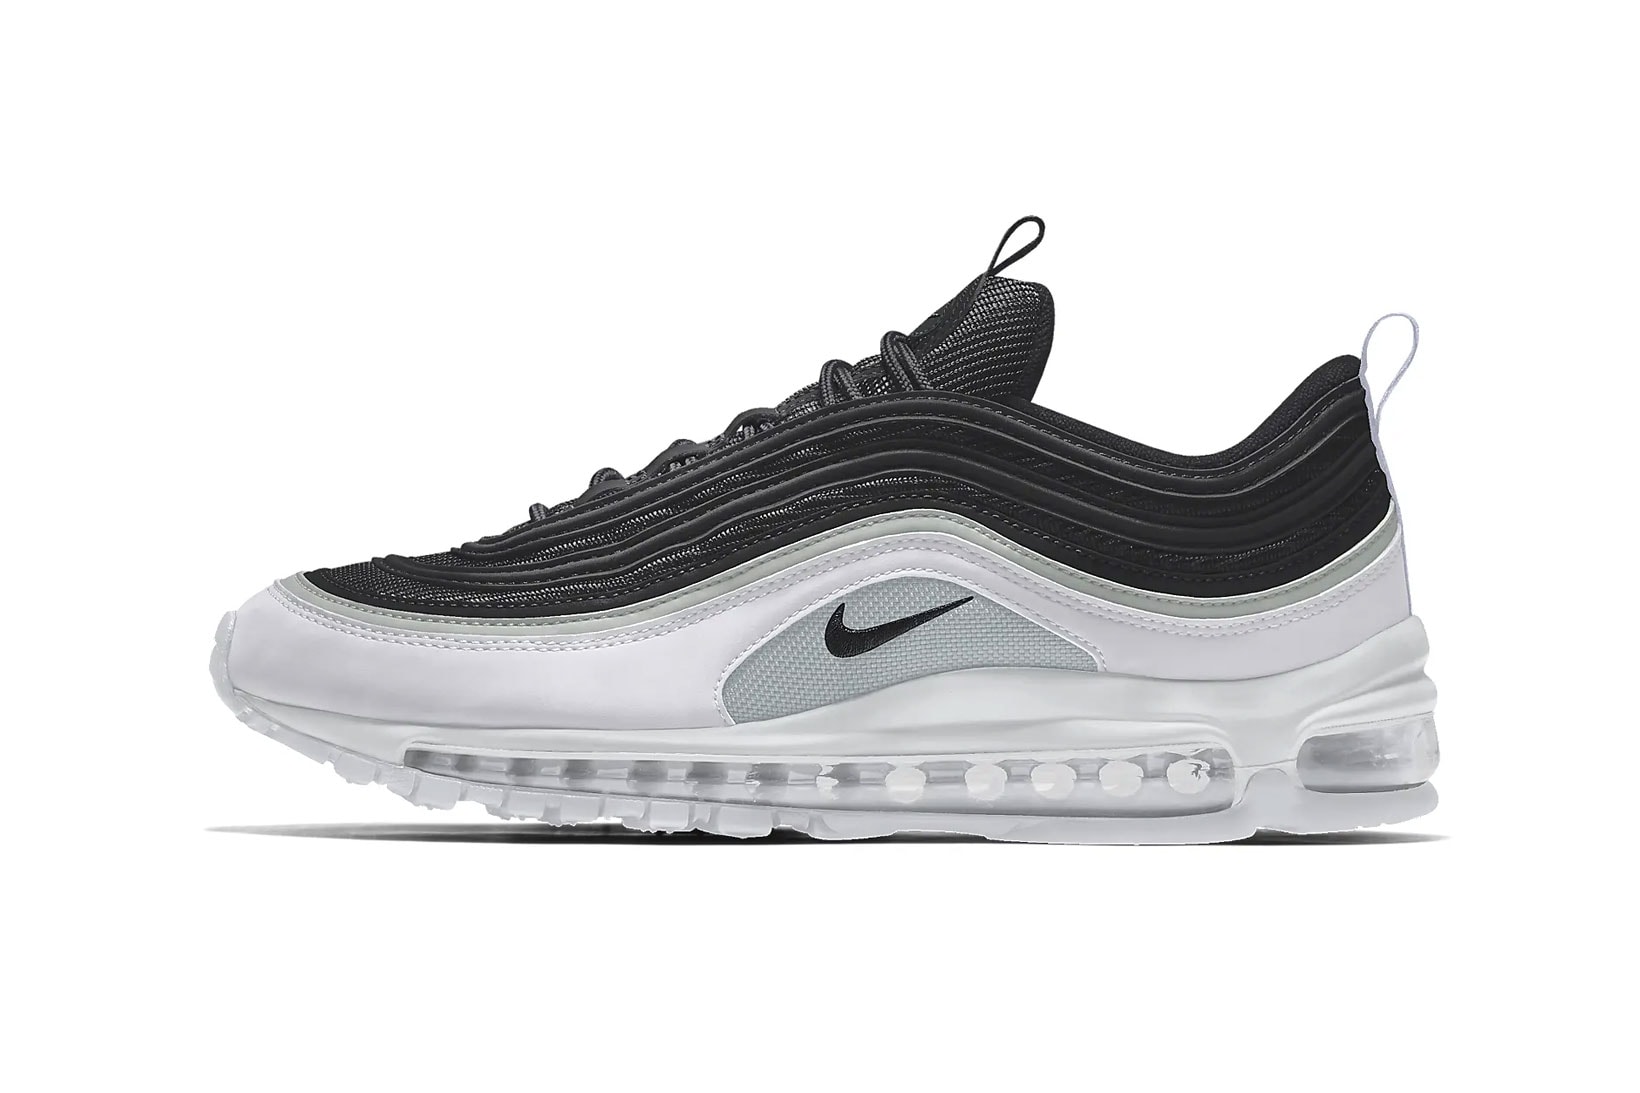 nike by you air max 97 am97 black white gray grey